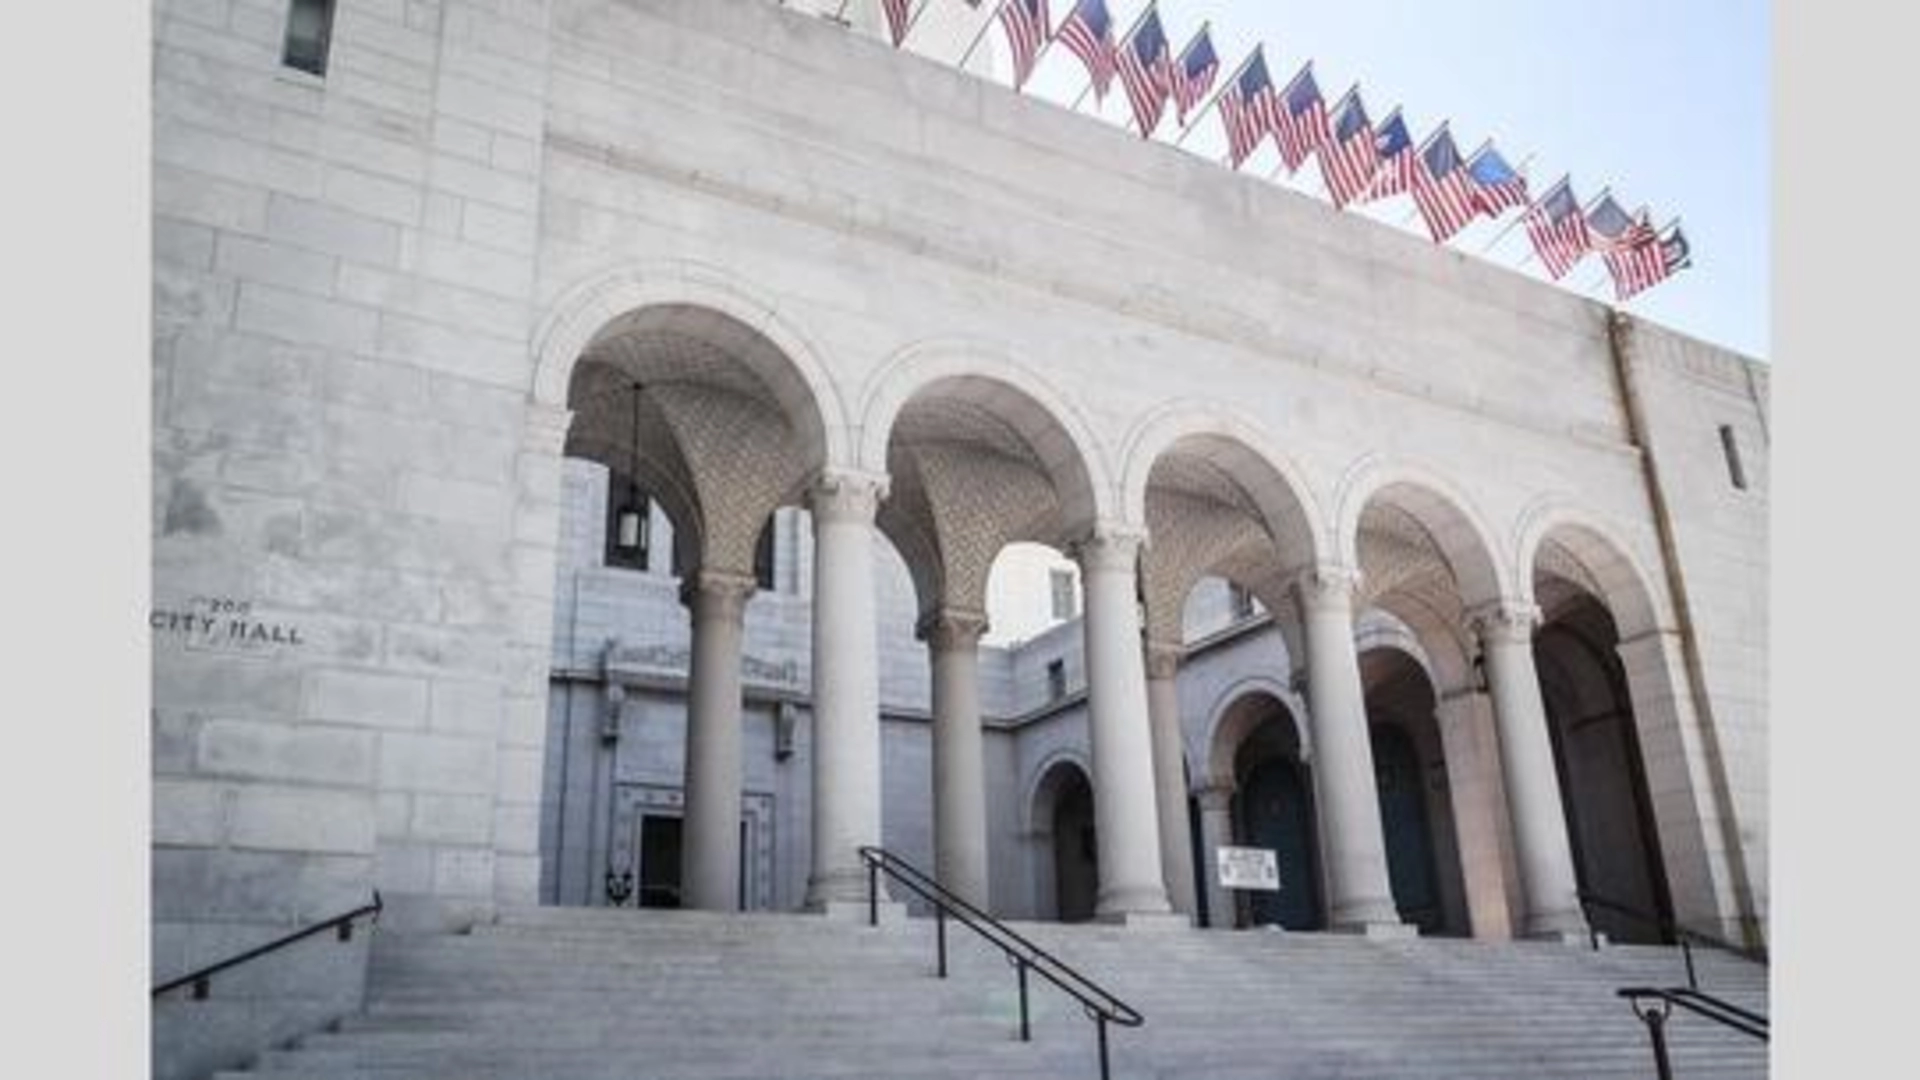 The Los Angeles City Hall forecourt, with stairs leading up, arches and columns and a row of American flags.